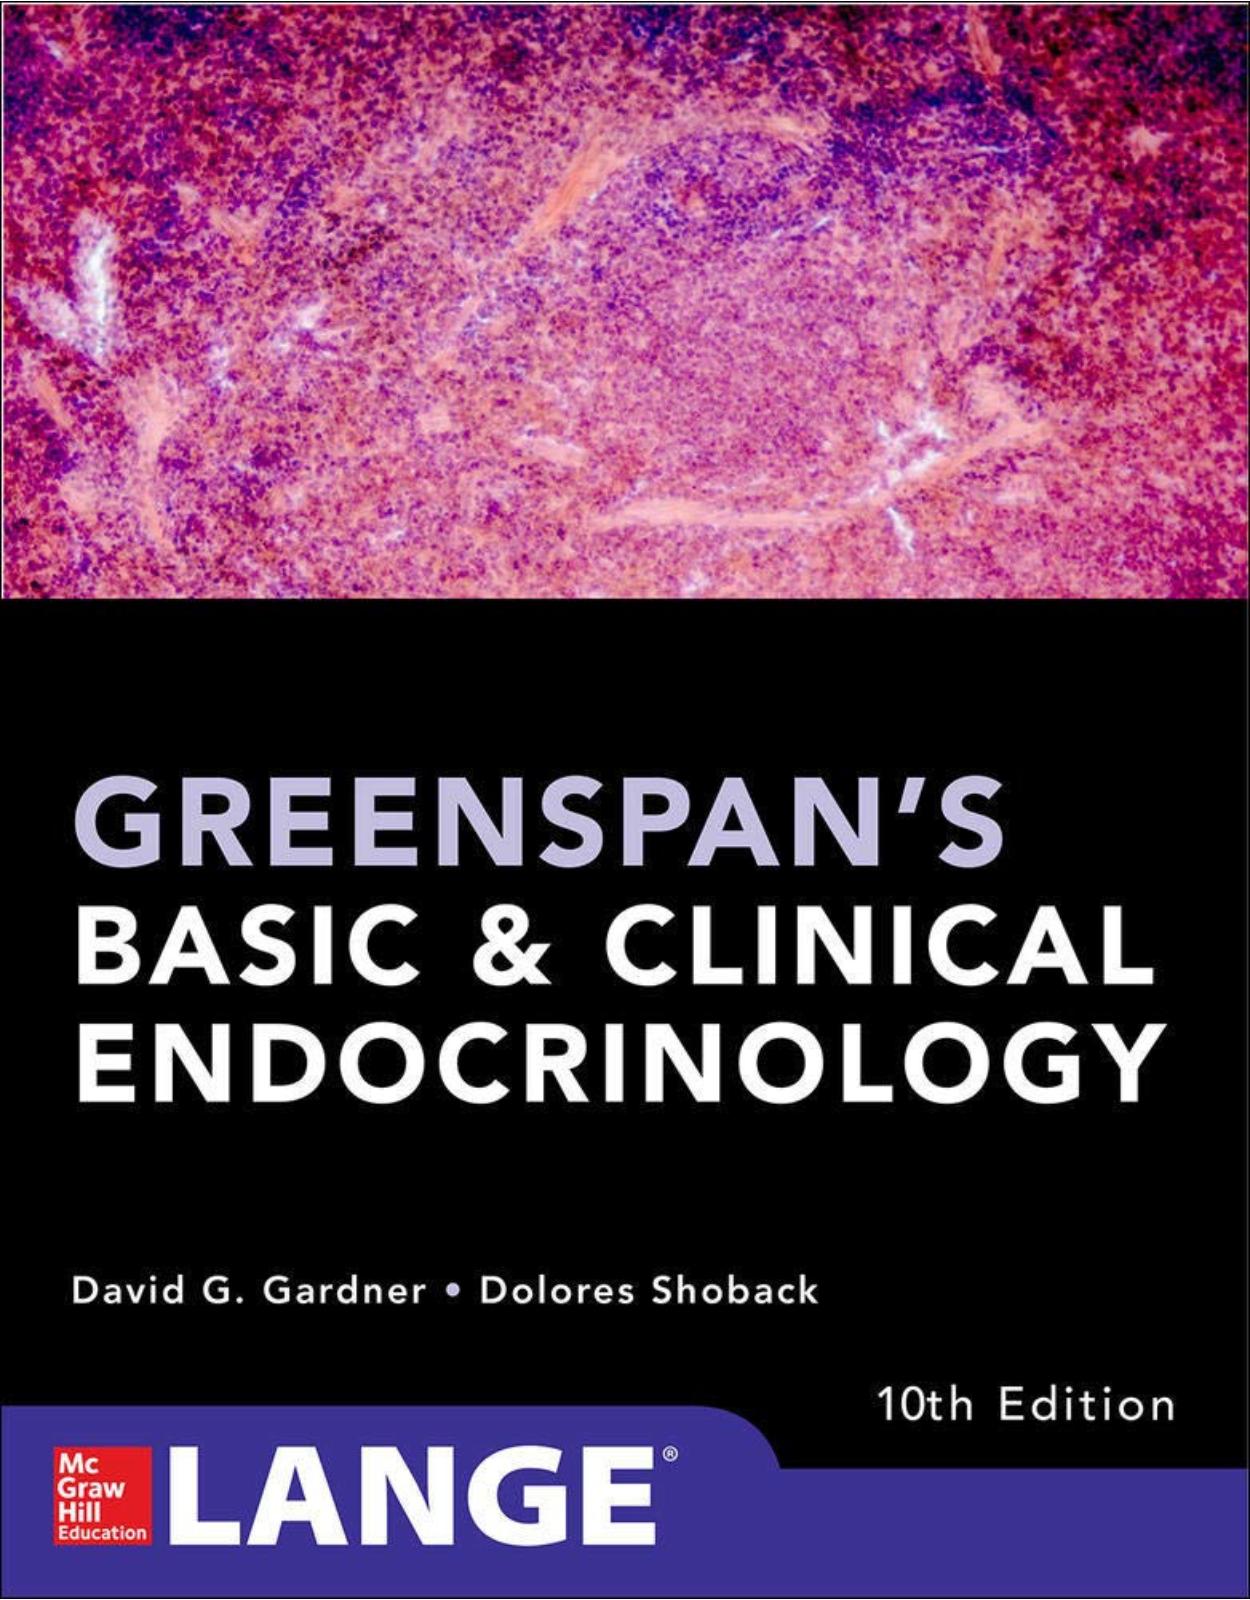 Greenspan’s Basic and Clinical Endocrinology, Tenth Edition